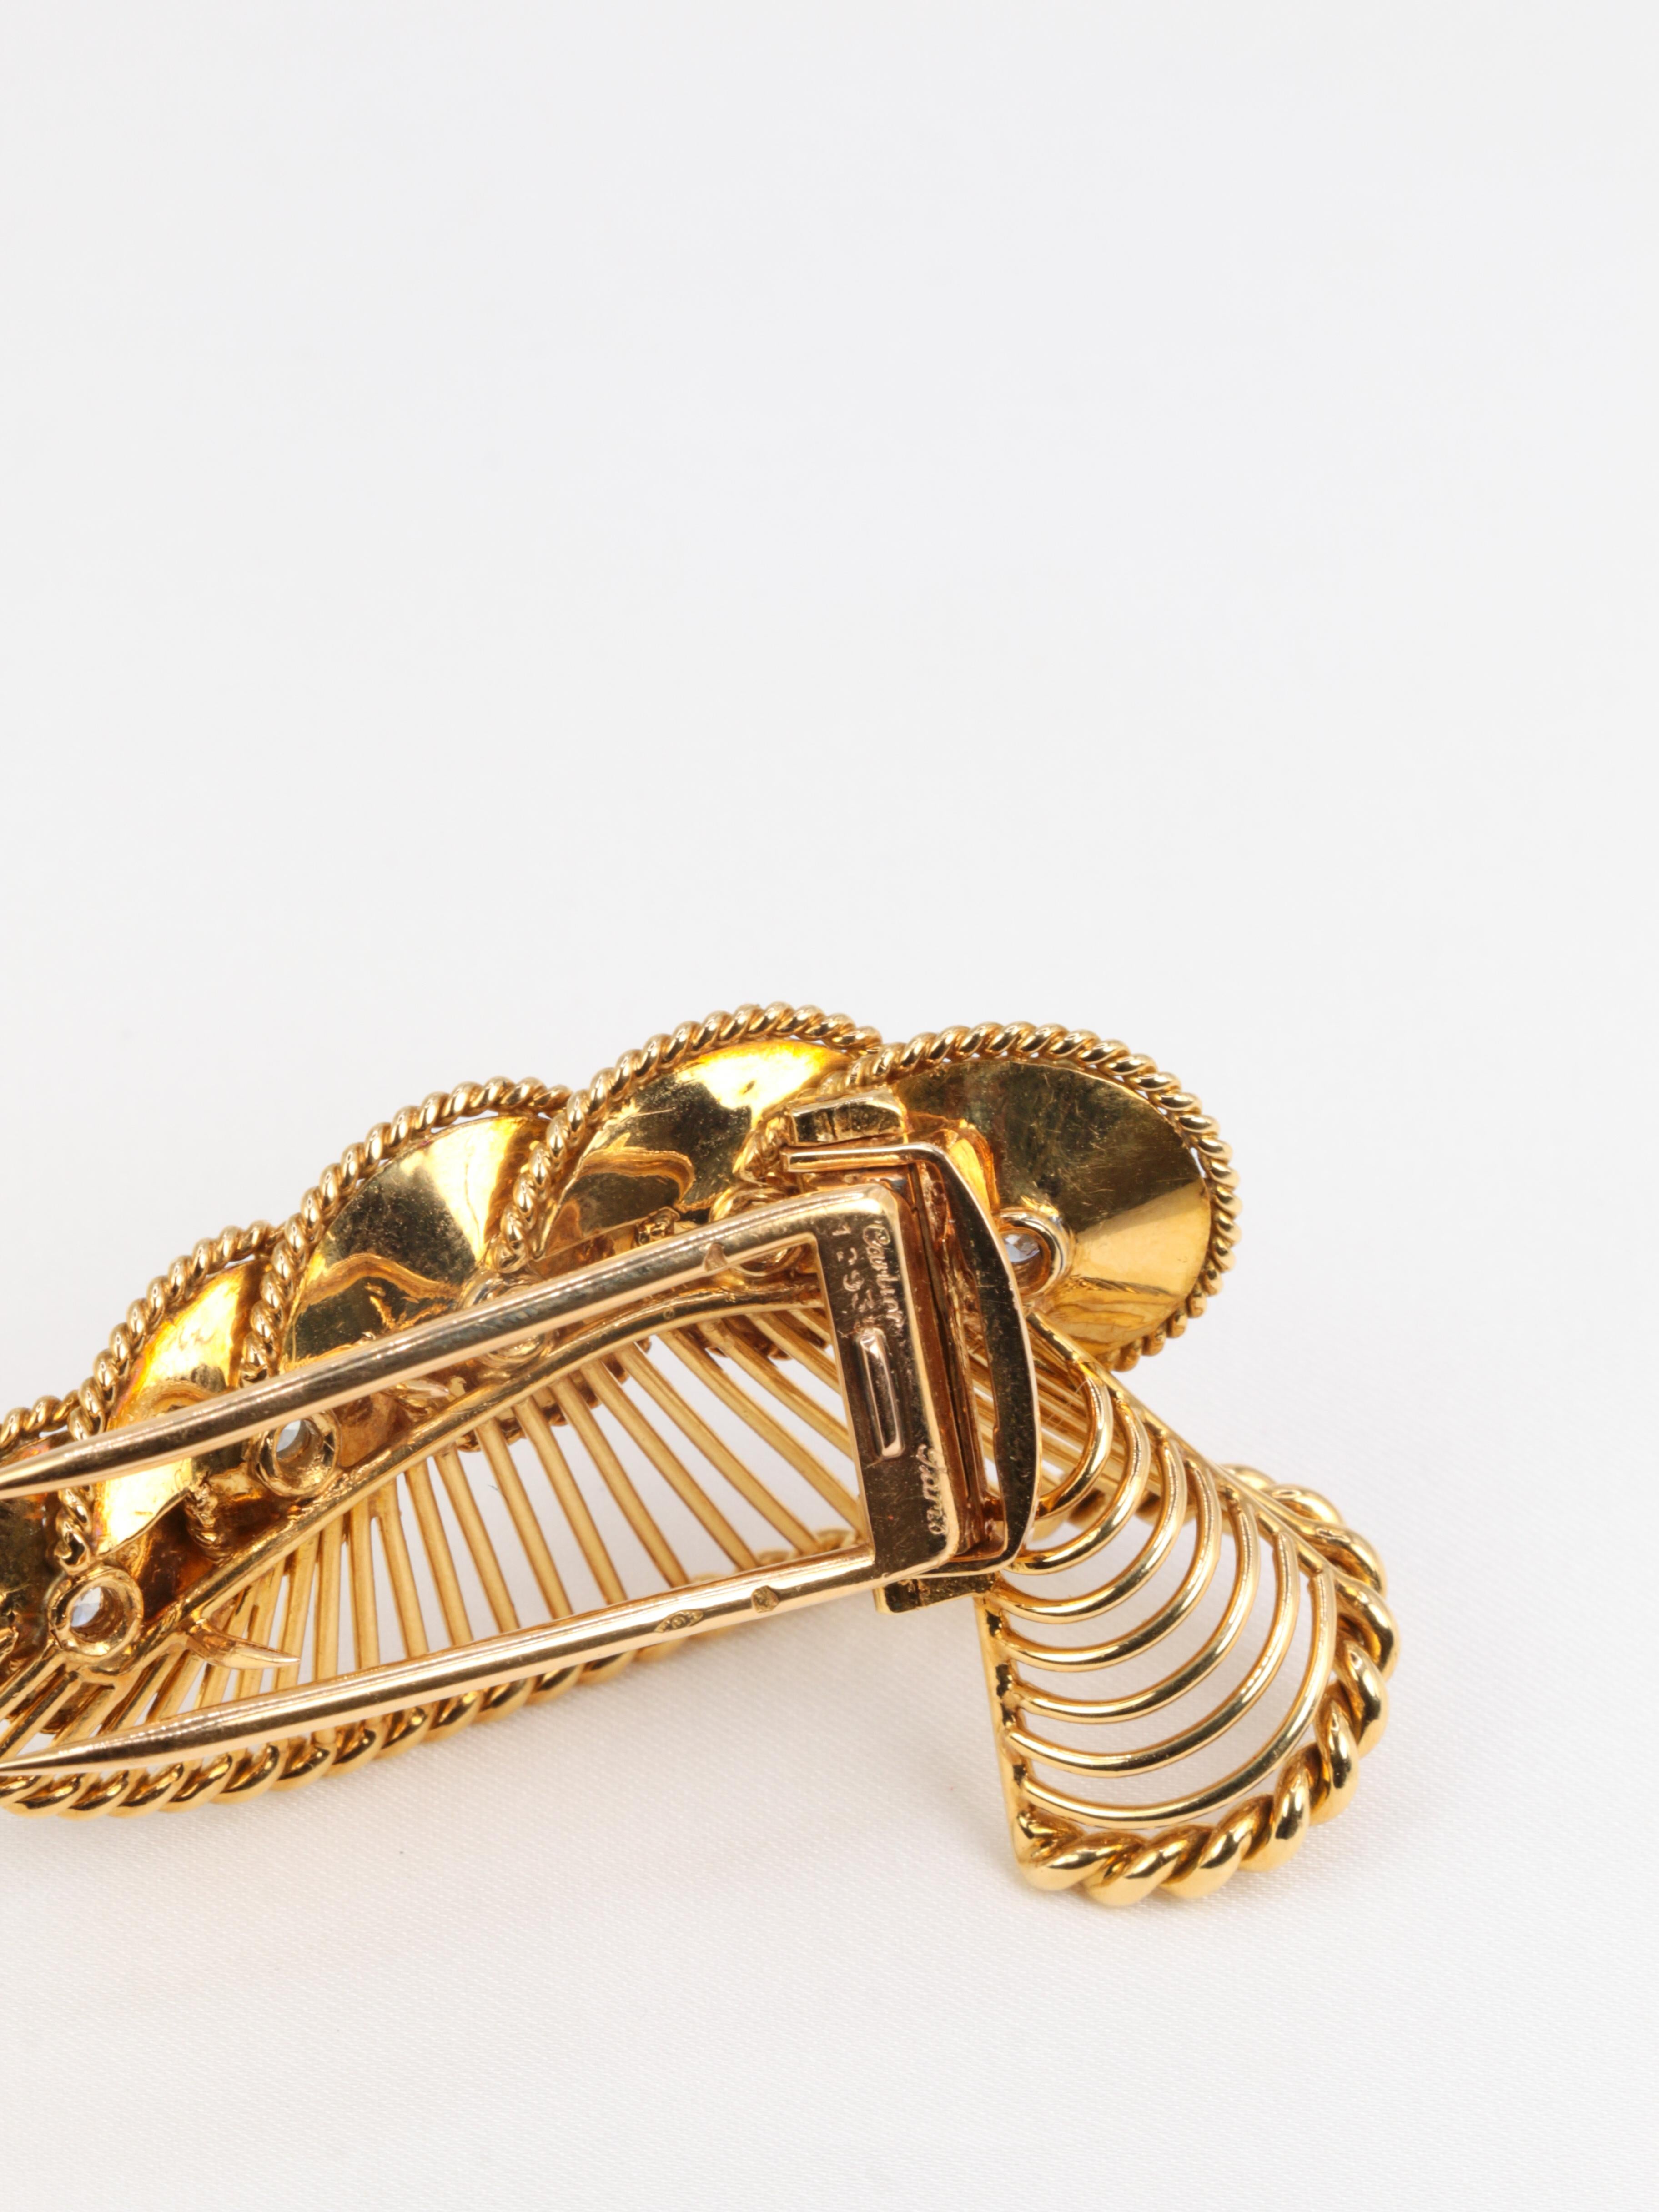 Gold Vintage Cartier Shell Brooch with Diamonds 3